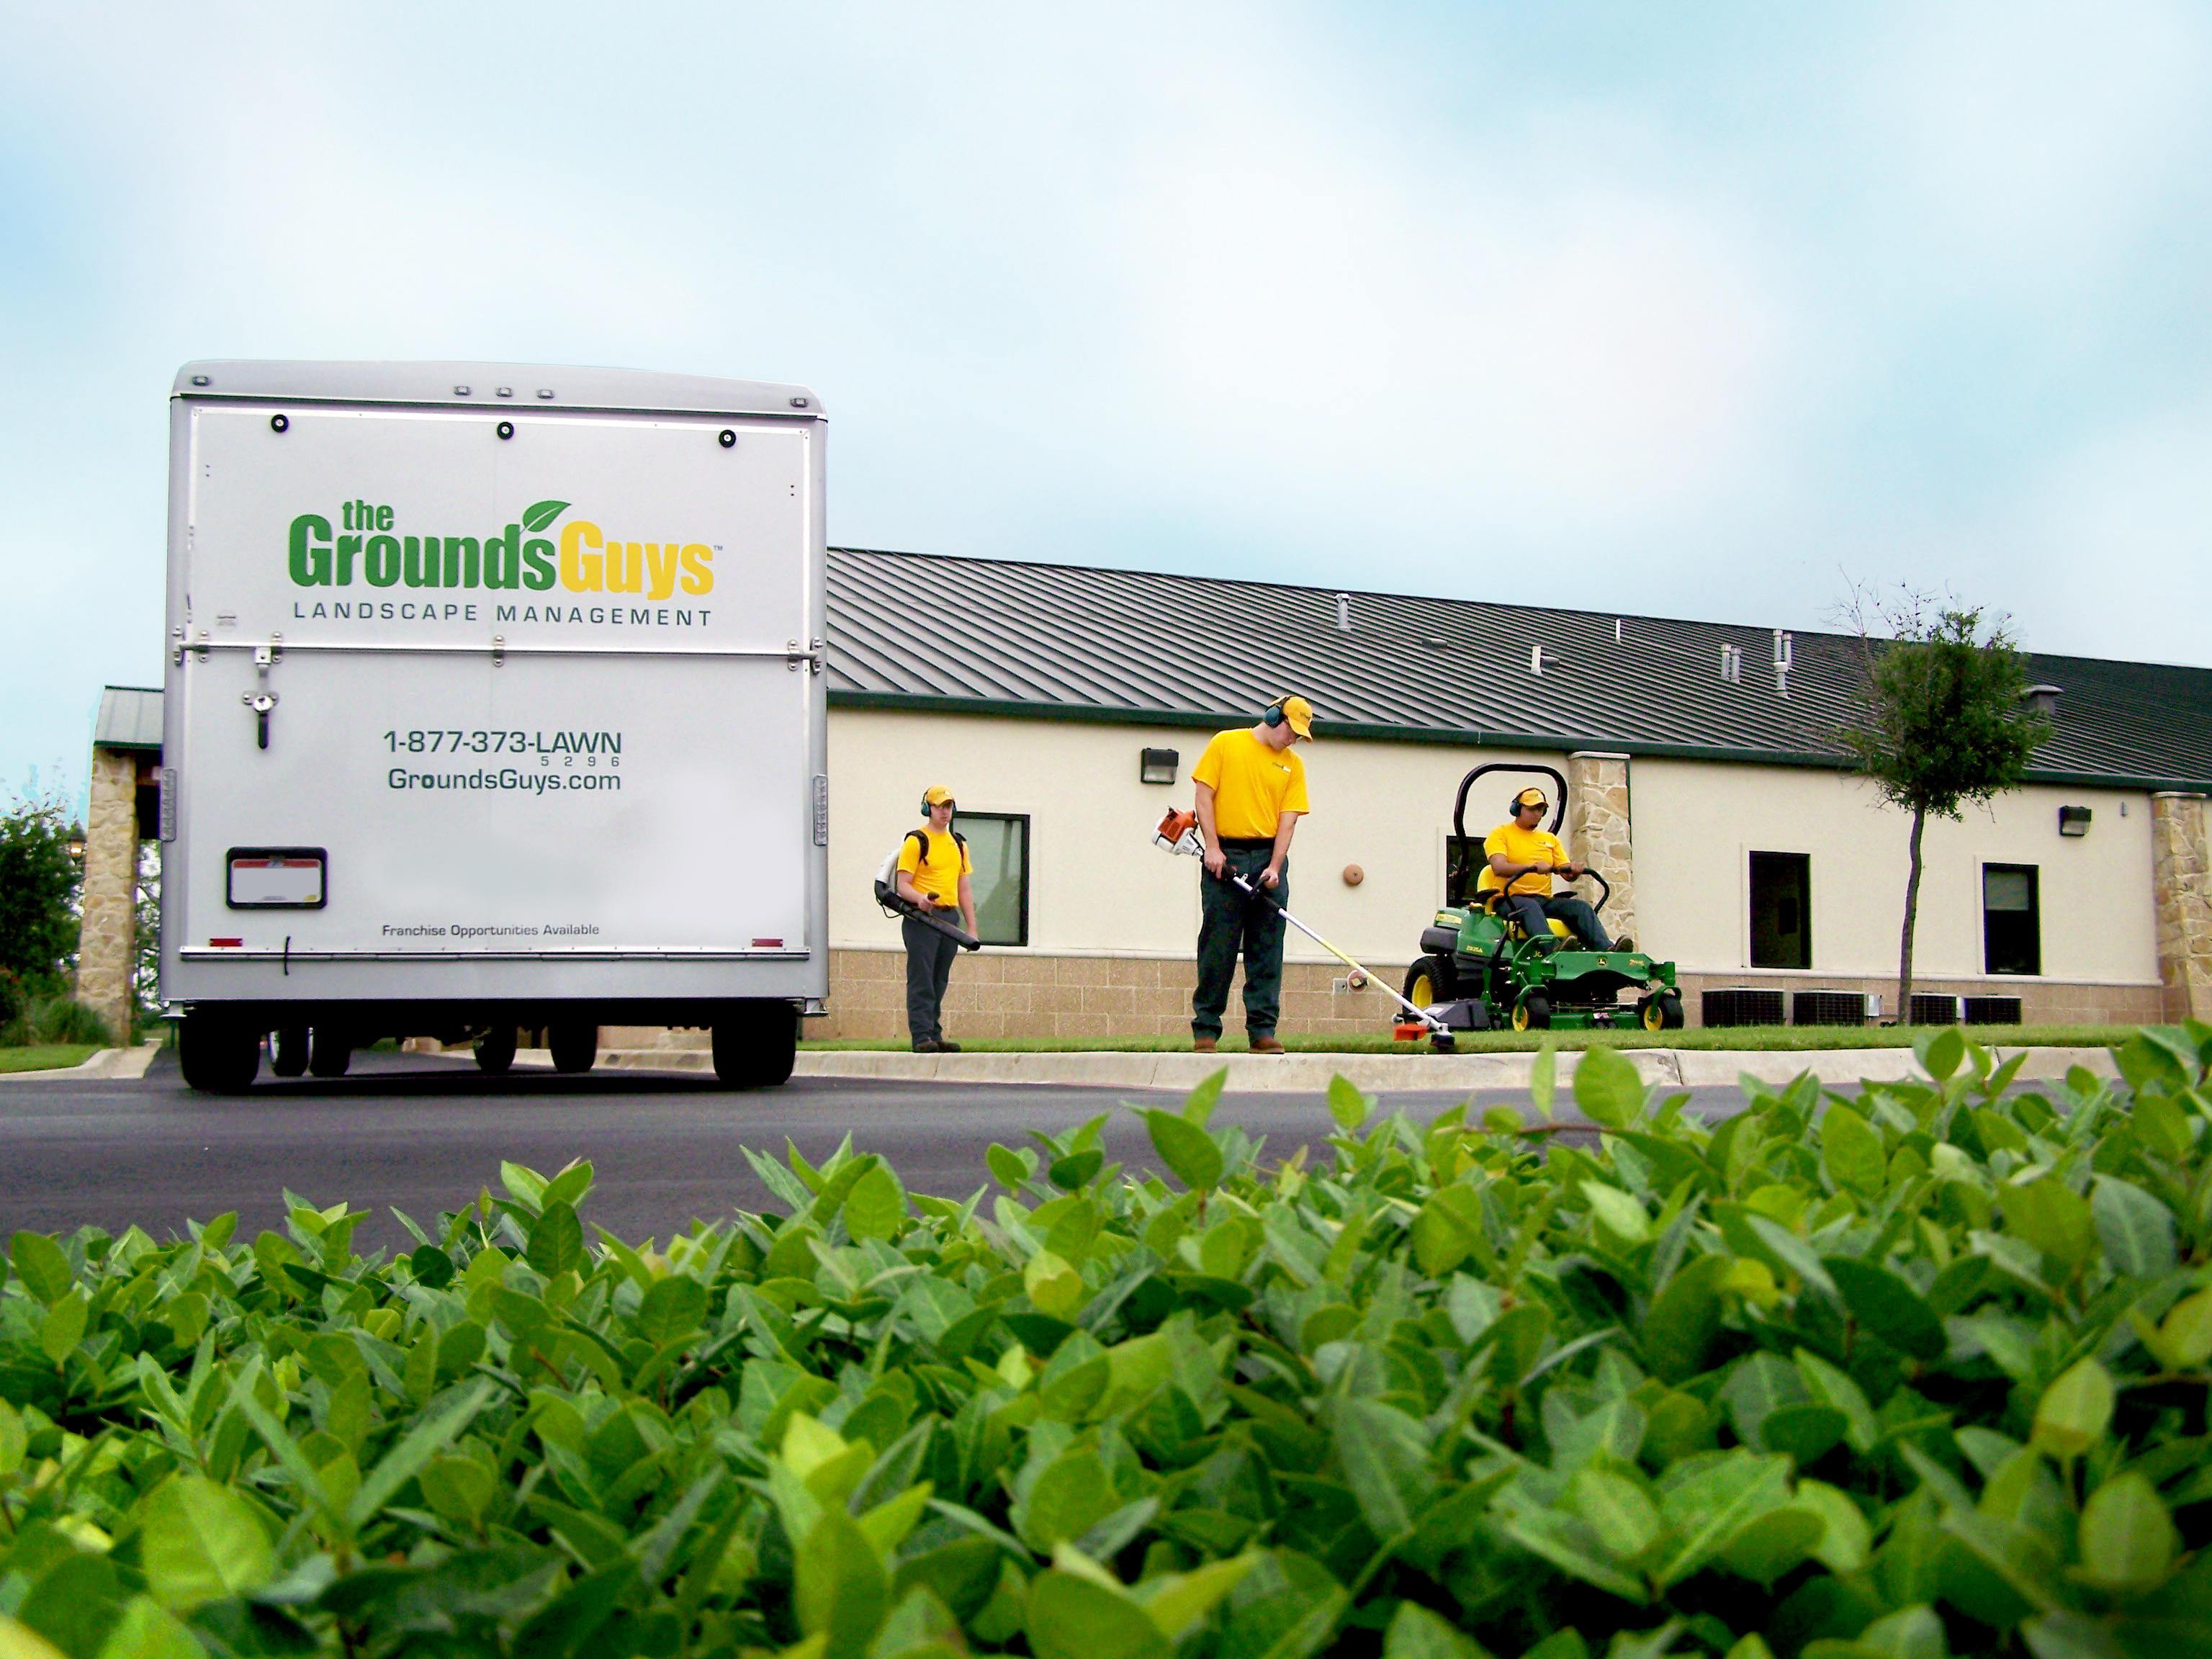 The Grounds Guys of Memorial Park Houston (713)597-6499